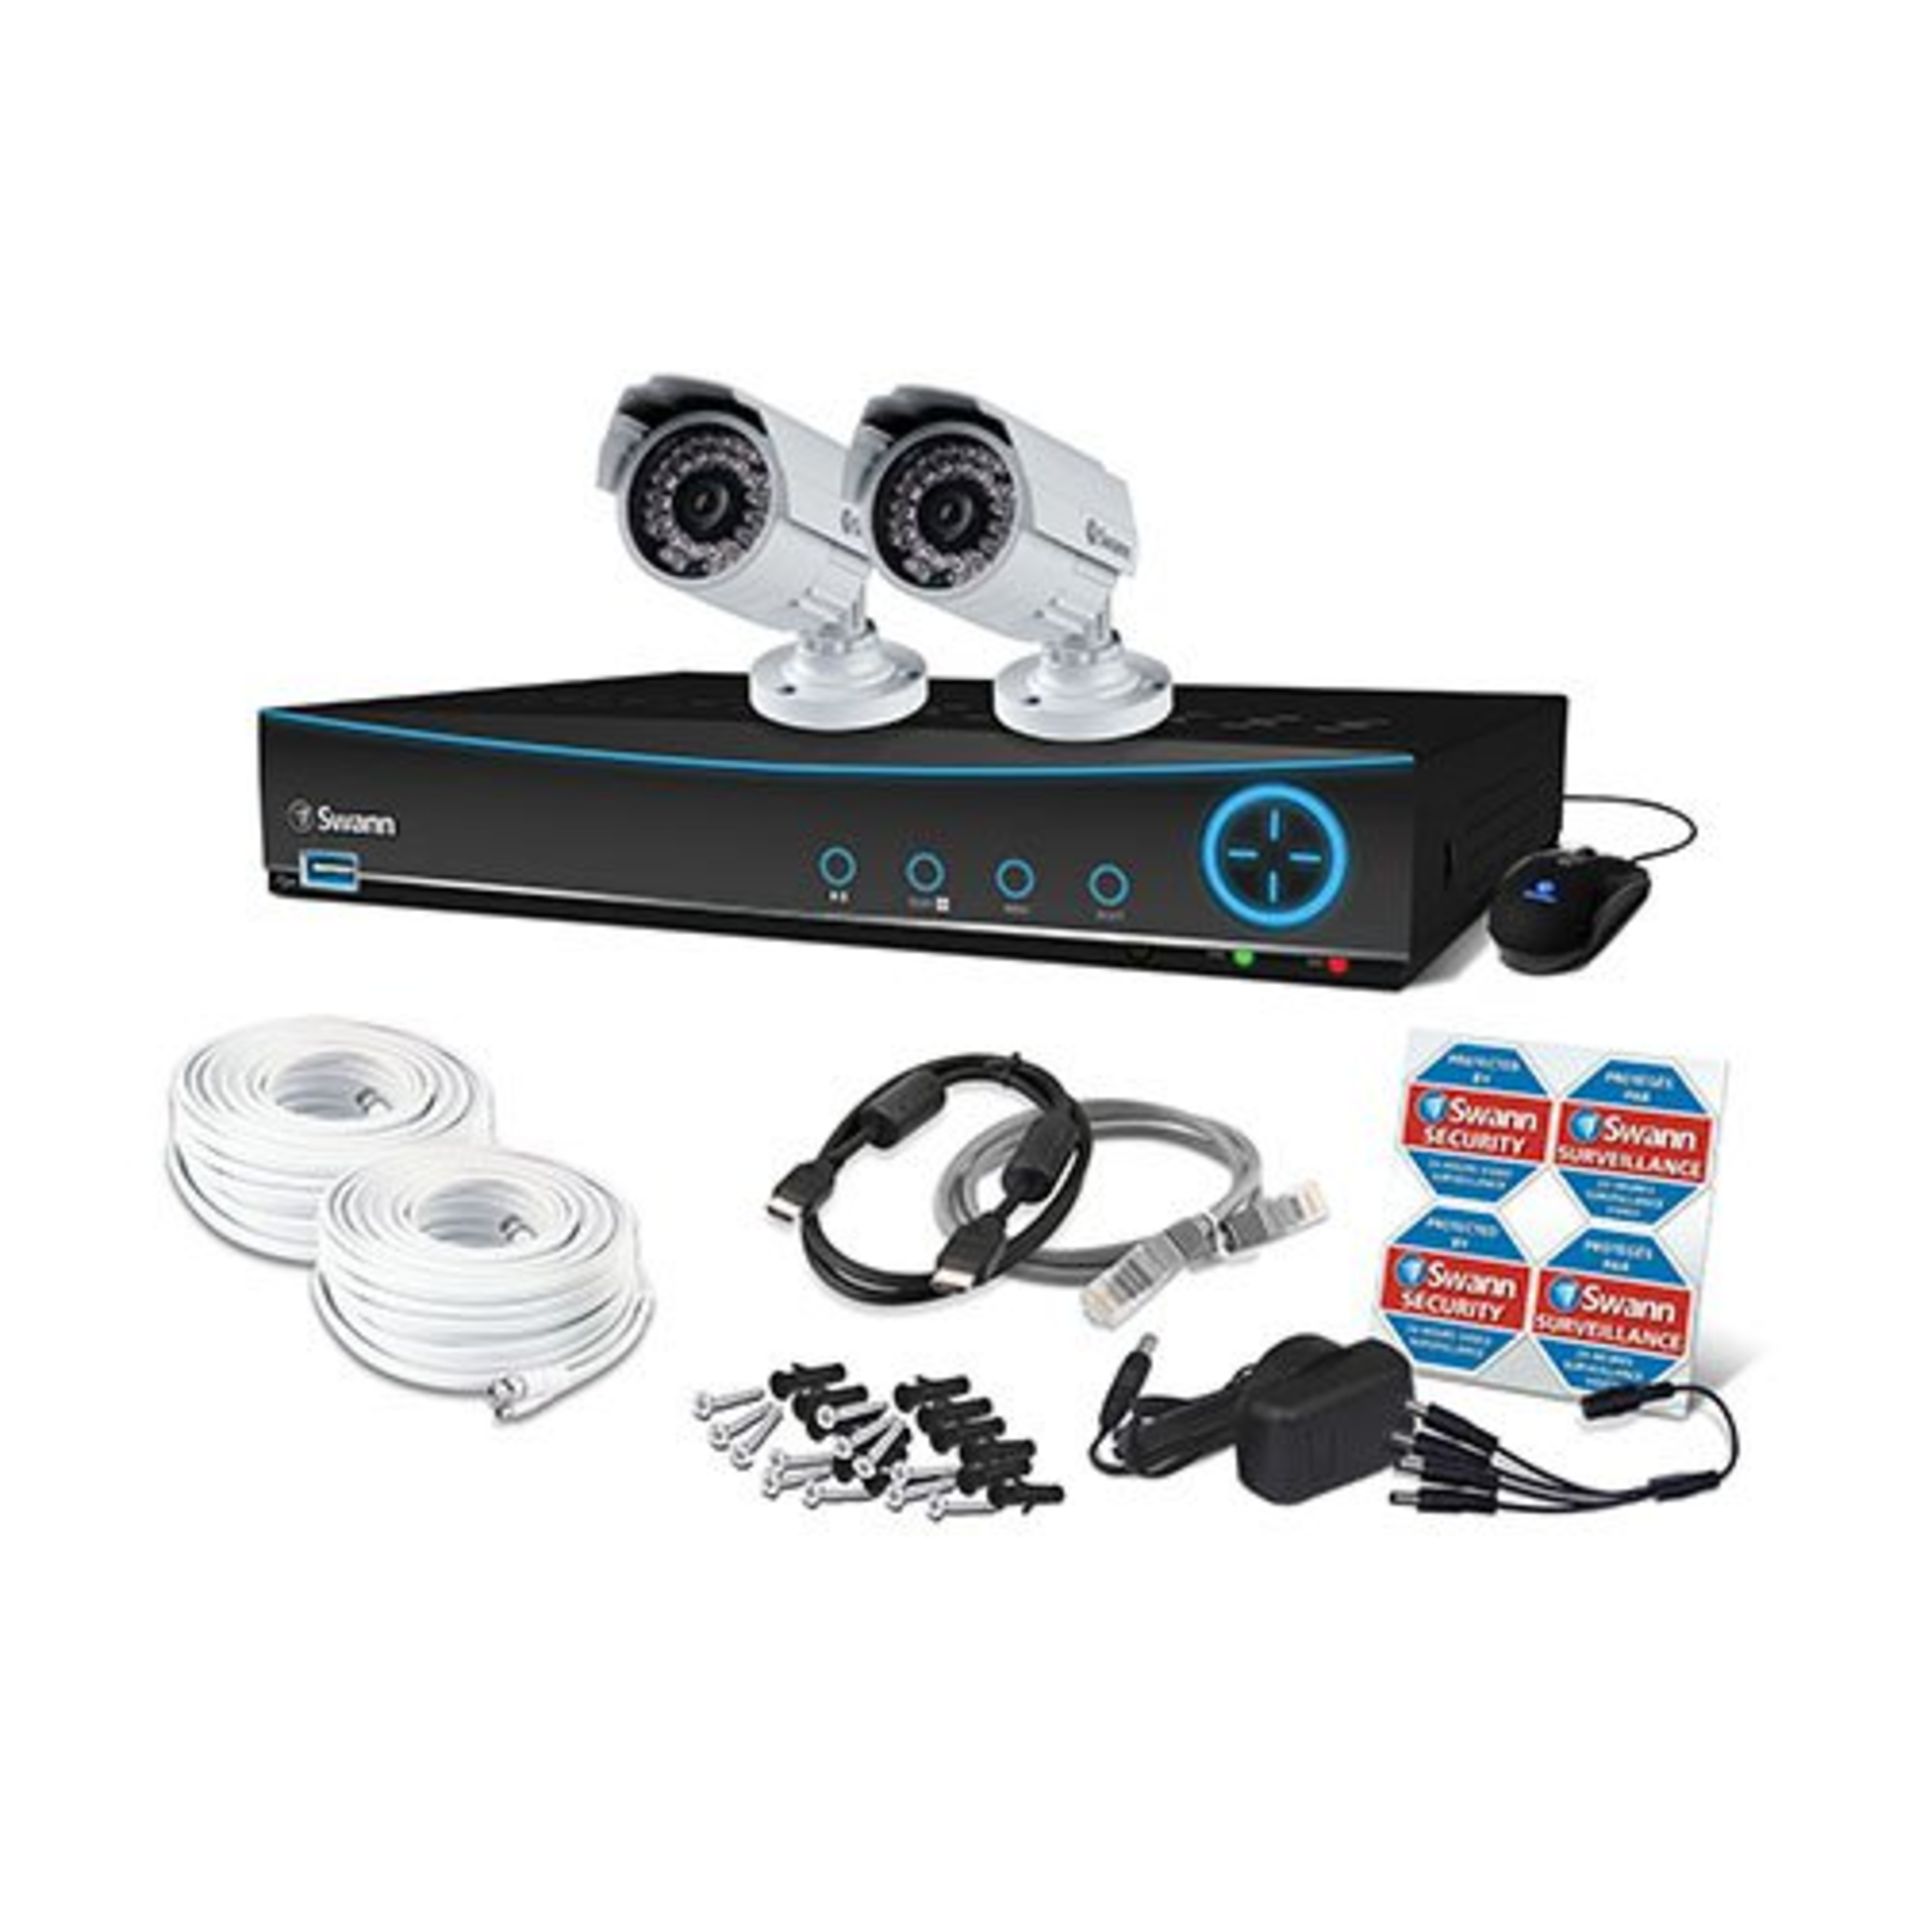 V Grade A Swann Model 441502 4 Channel Digital Video Security System With Recorder & 2 Pro